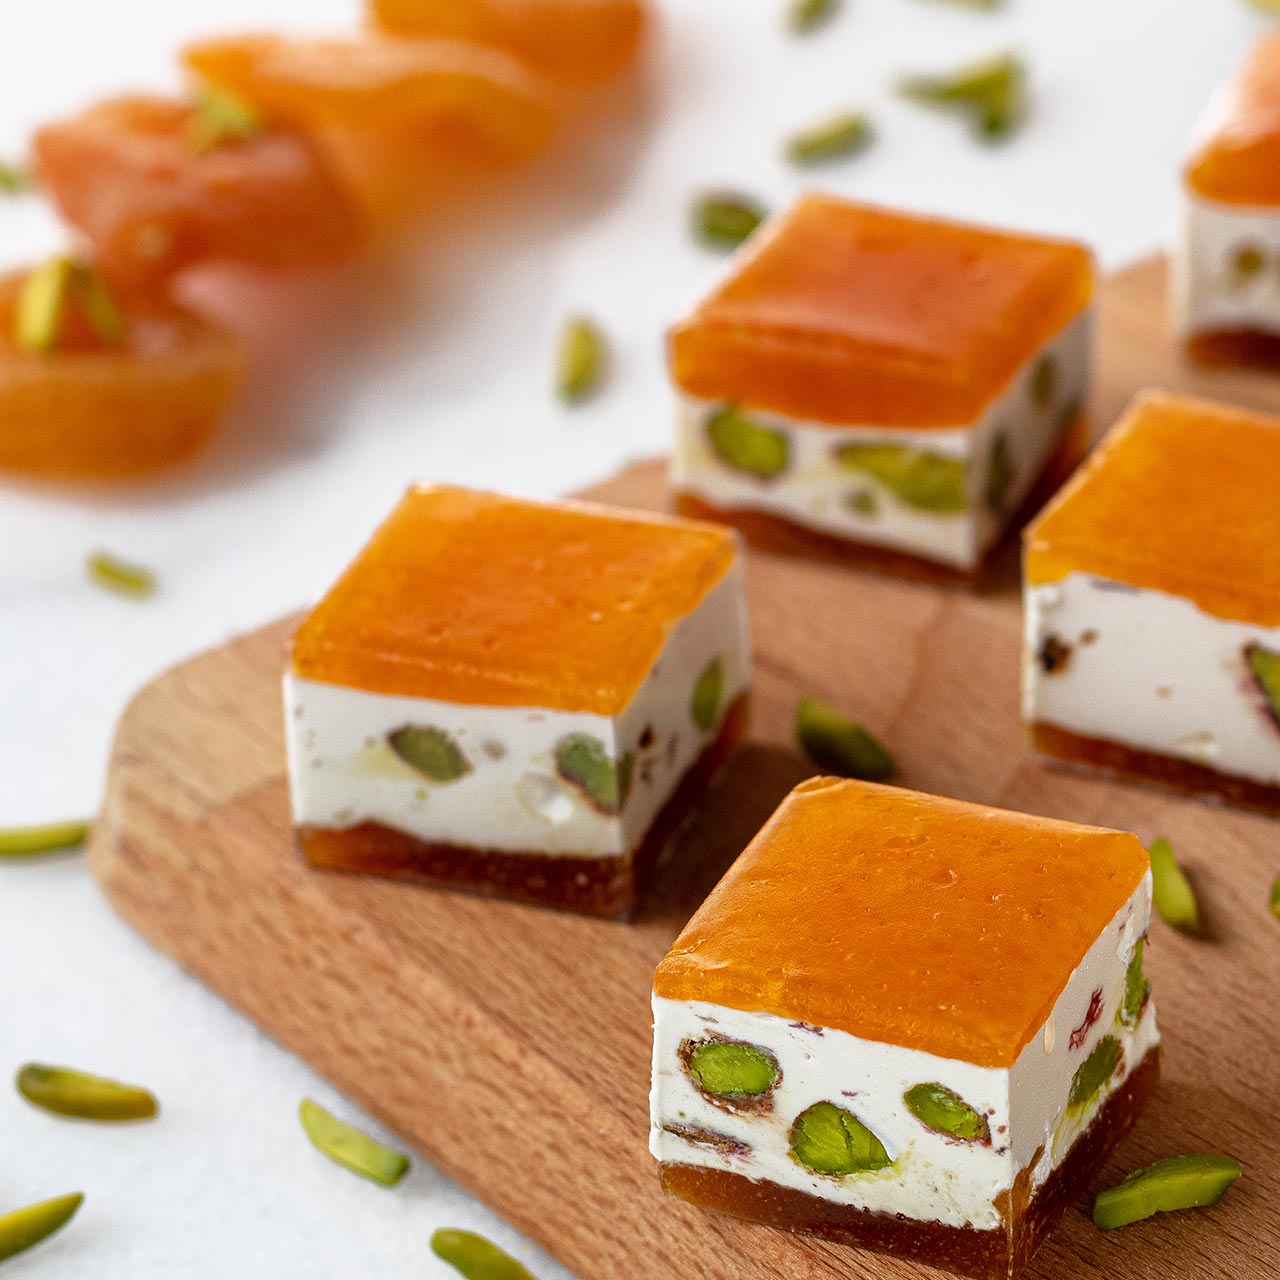 Premium Pistachio Filled Honey Nougat Between Layers of Dried Apricot